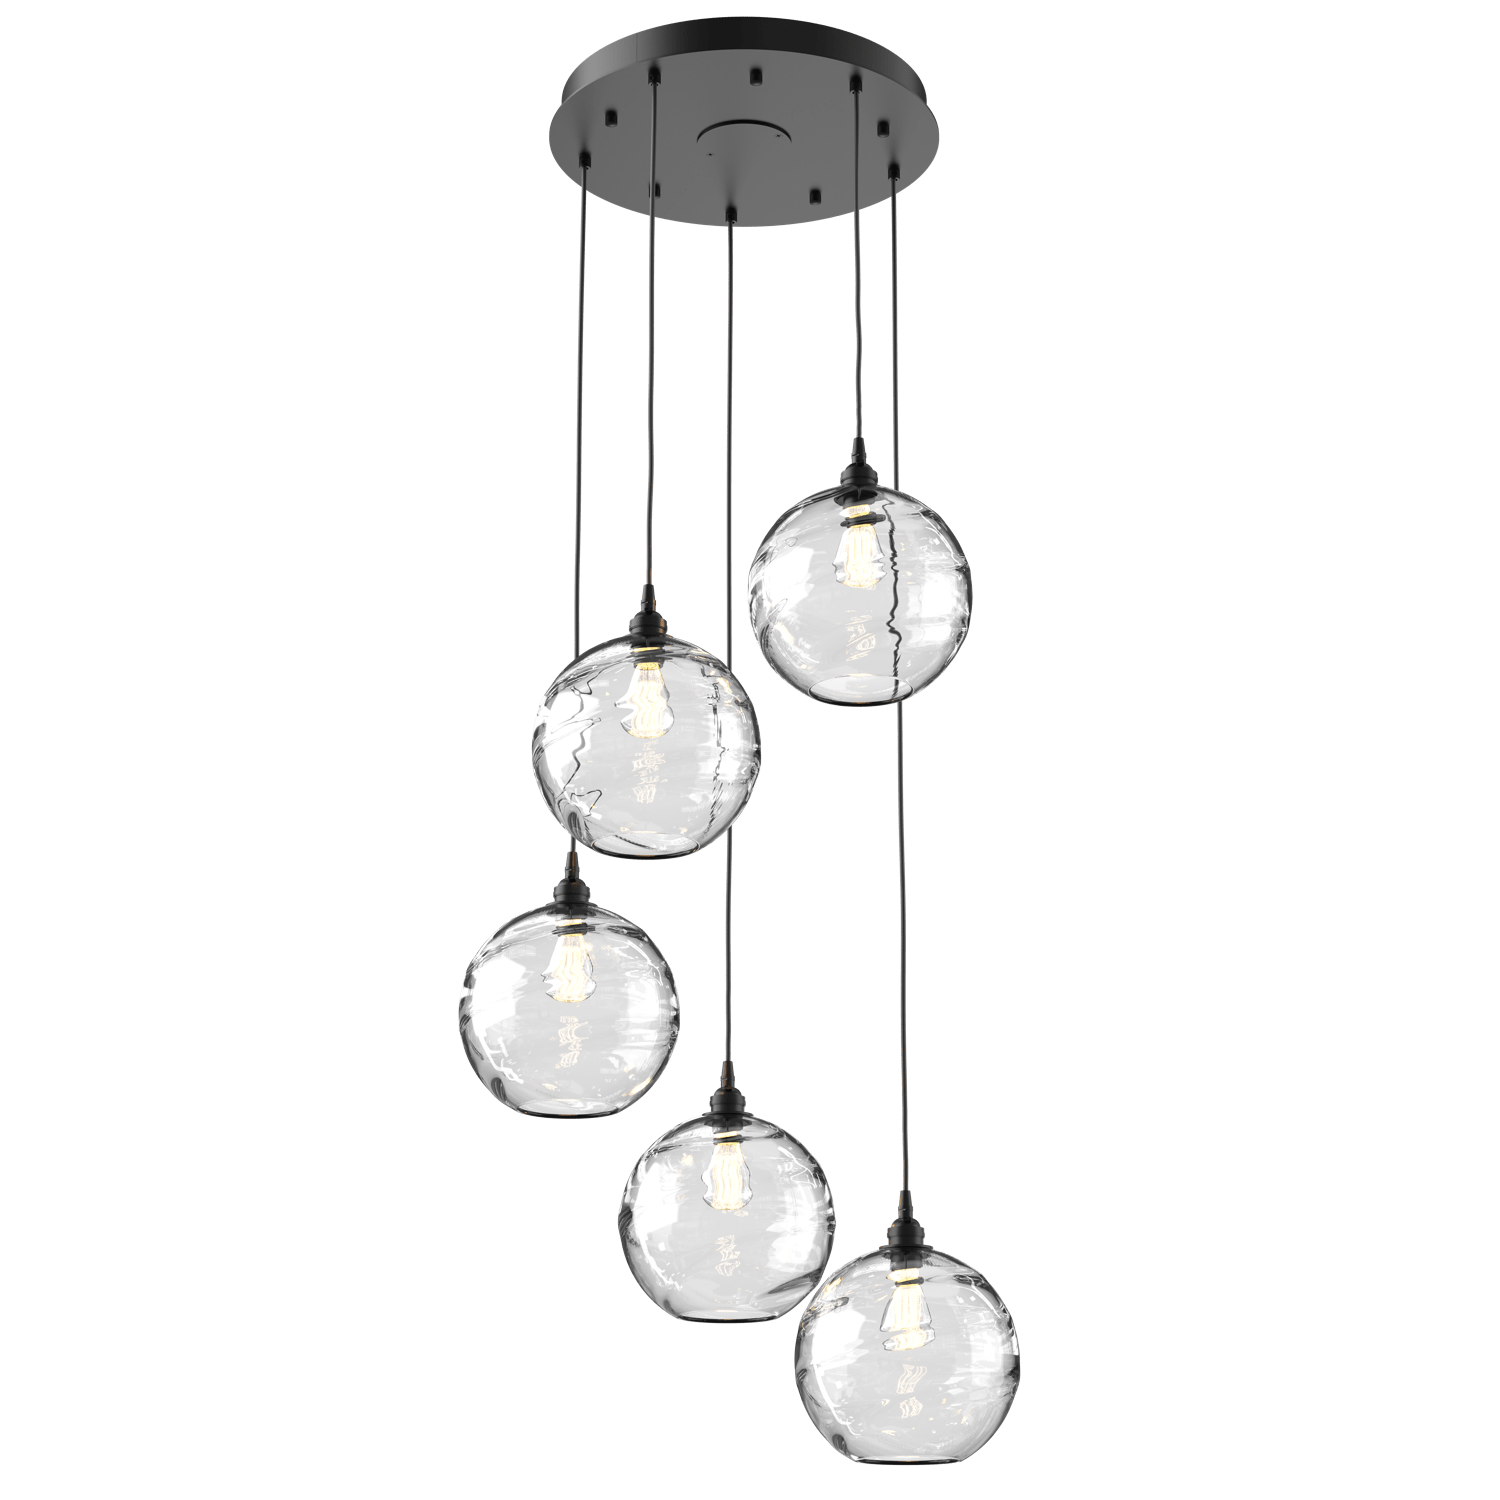 CHB0047-05-MB-OC-Hammerton-Studio-Optic-Blown-Glass-Terra-5-light-round-pendant-chandelier-with-matte-black-finish-and-optic-clear-blown-glass-shades-and-incandescent-lamping